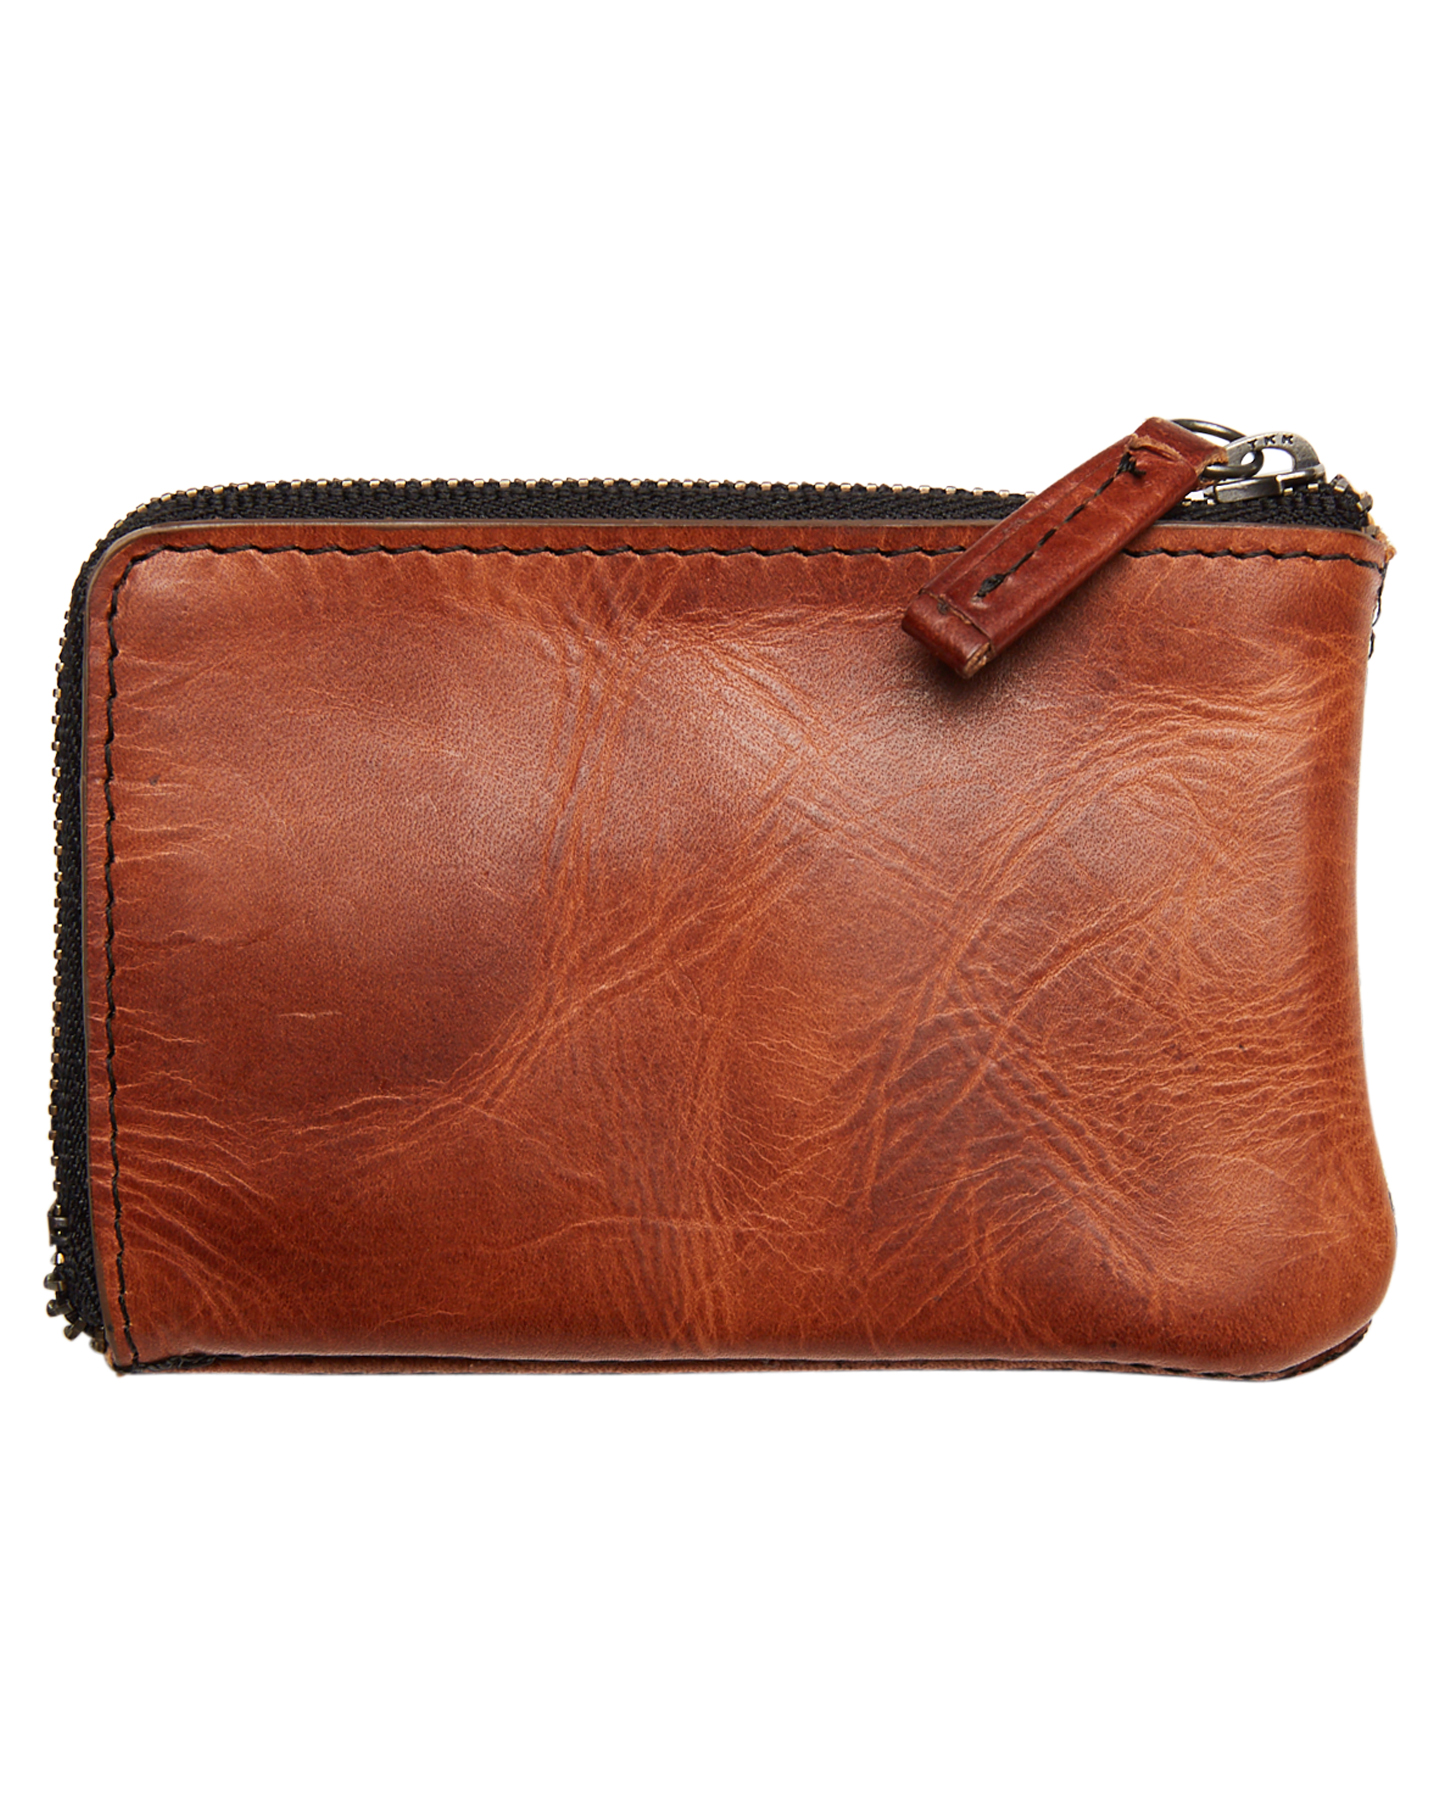 Rip Curl Handcrafted Zip Coin Slim Leather Wallet - Brown | SurfStitch